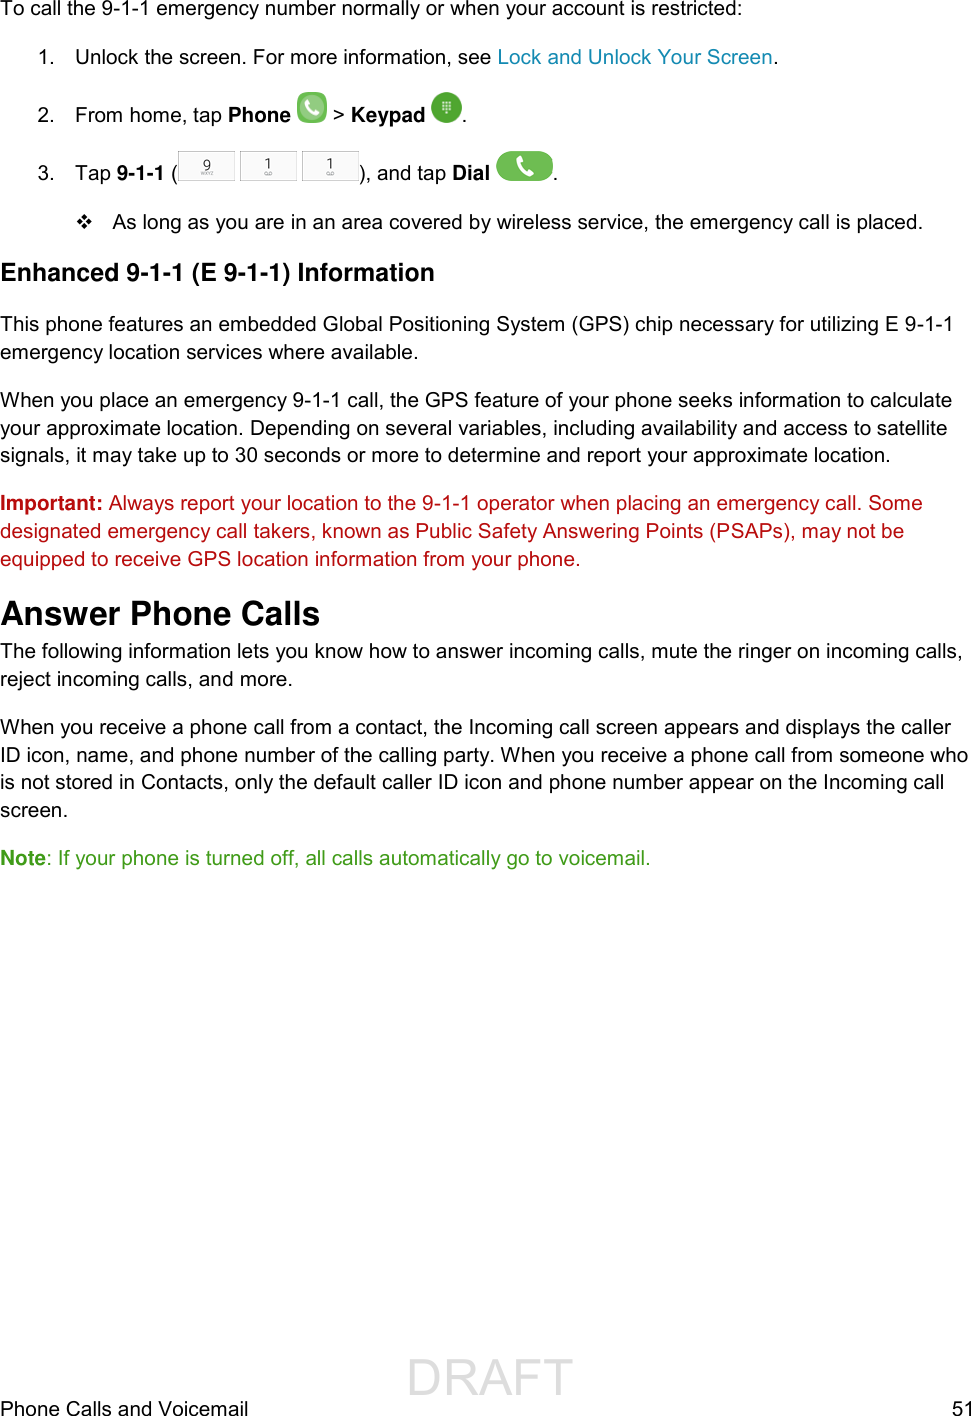                  DRAFT FOR INTERNAL USE ONLYPhone Calls and Voicemail  51 To call the 9-1-1 emergency number normally or when your account is restricted: 1.  Unlock the screen. For more information, see Lock and Unlock Your Screen. 2.  From home, tap Phone   &gt; Keypad  . 3.  Tap 9-1-1 (     ), and tap Dial  .   As long as you are in an area covered by wireless service, the emergency call is placed. Enhanced 9-1-1 (E 9-1-1) Information This phone features an embedded Global Positioning System (GPS) chip necessary for utilizing E 9-1-1 emergency location services where available. When you place an emergency 9-1-1 call, the GPS feature of your phone seeks information to calculate your approximate location. Depending on several variables, including availability and access to satellite signals, it may take up to 30 seconds or more to determine and report your approximate location. Important: Always report your location to the 9-1-1 operator when placing an emergency call. Some designated emergency call takers, known as Public Safety Answering Points (PSAPs), may not be equipped to receive GPS location information from your phone. Answer Phone Calls The following information lets you know how to answer incoming calls, mute the ringer on incoming calls, reject incoming calls, and more. When you receive a phone call from a contact, the Incoming call screen appears and displays the caller ID icon, name, and phone number of the calling party. When you receive a phone call from someone who is not stored in Contacts, only the default caller ID icon and phone number appear on the Incoming call screen. Note: If your phone is turned off, all calls automatically go to voicemail. 